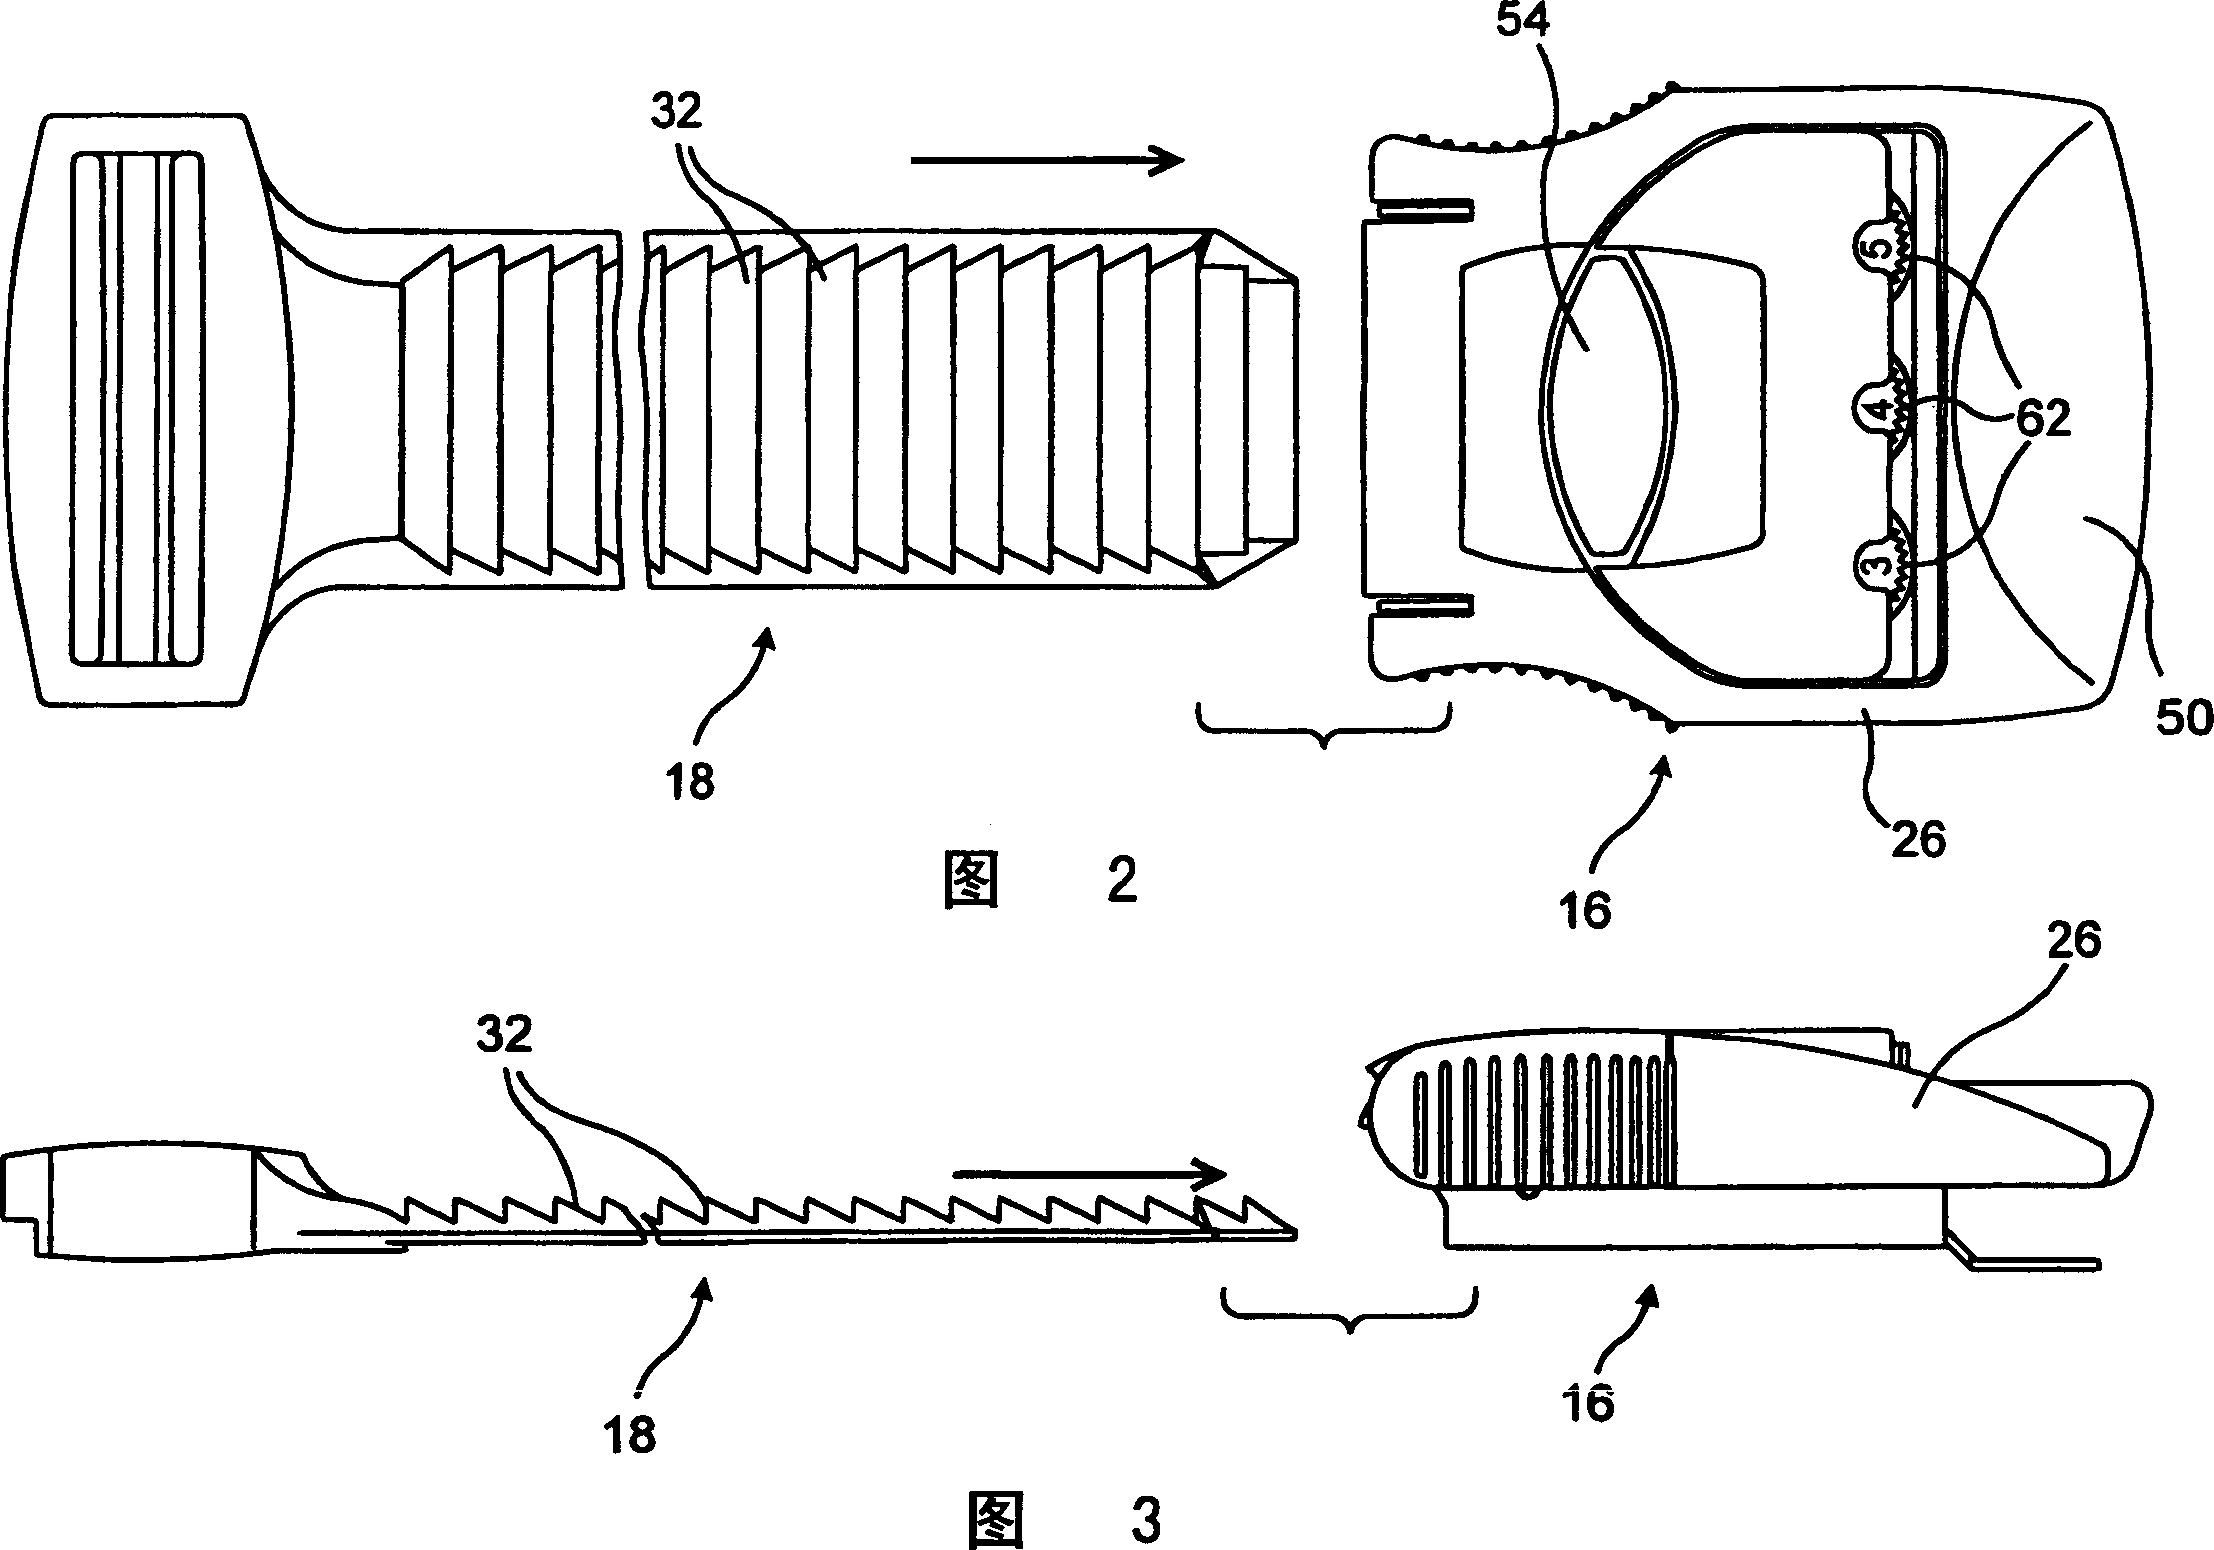 Luggage belt with lock and ratchet mechanism